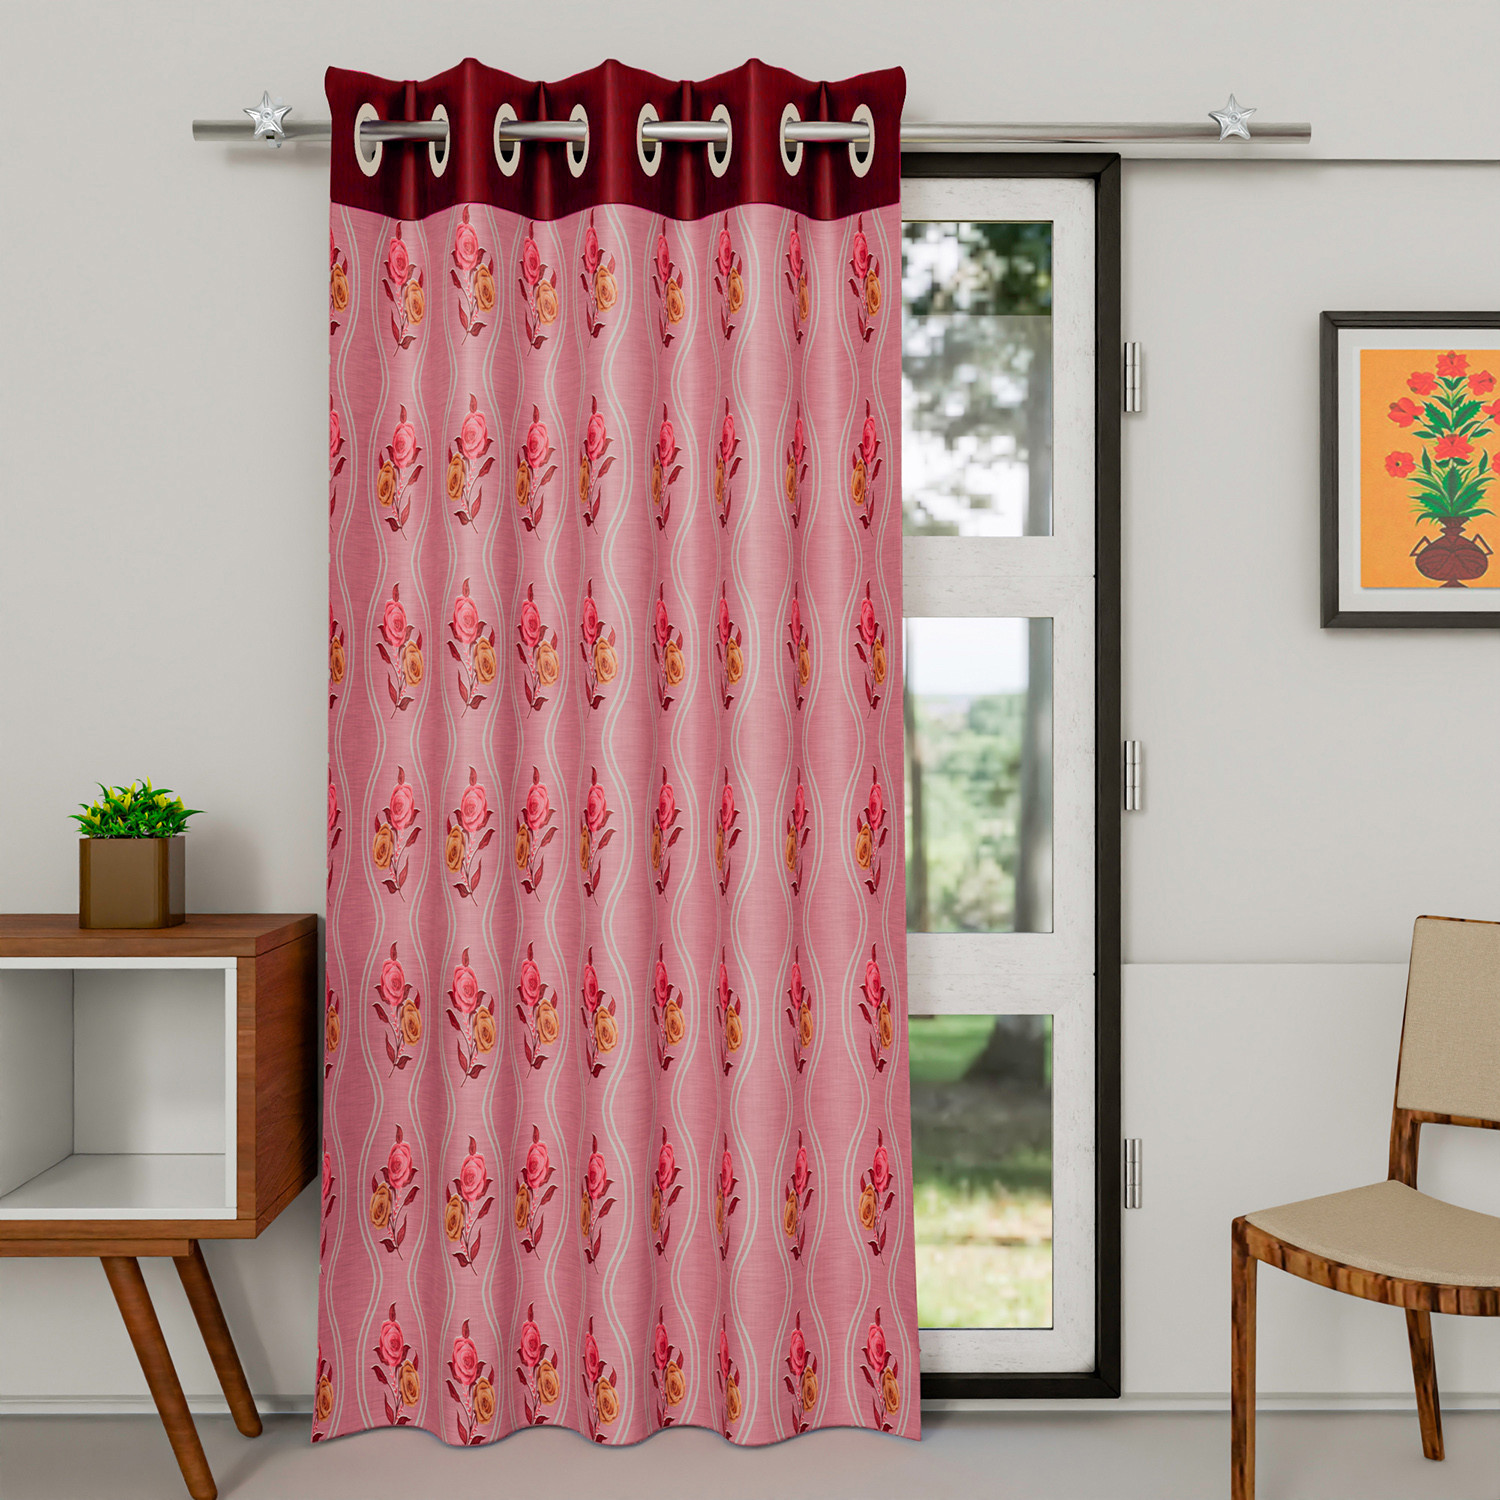 Kuber Industries Polyester Decorative 7 Feet Door Curtain | Rose Print Blackout Drapes Curtain With 8 Eyelet For Home & Office (Pink)